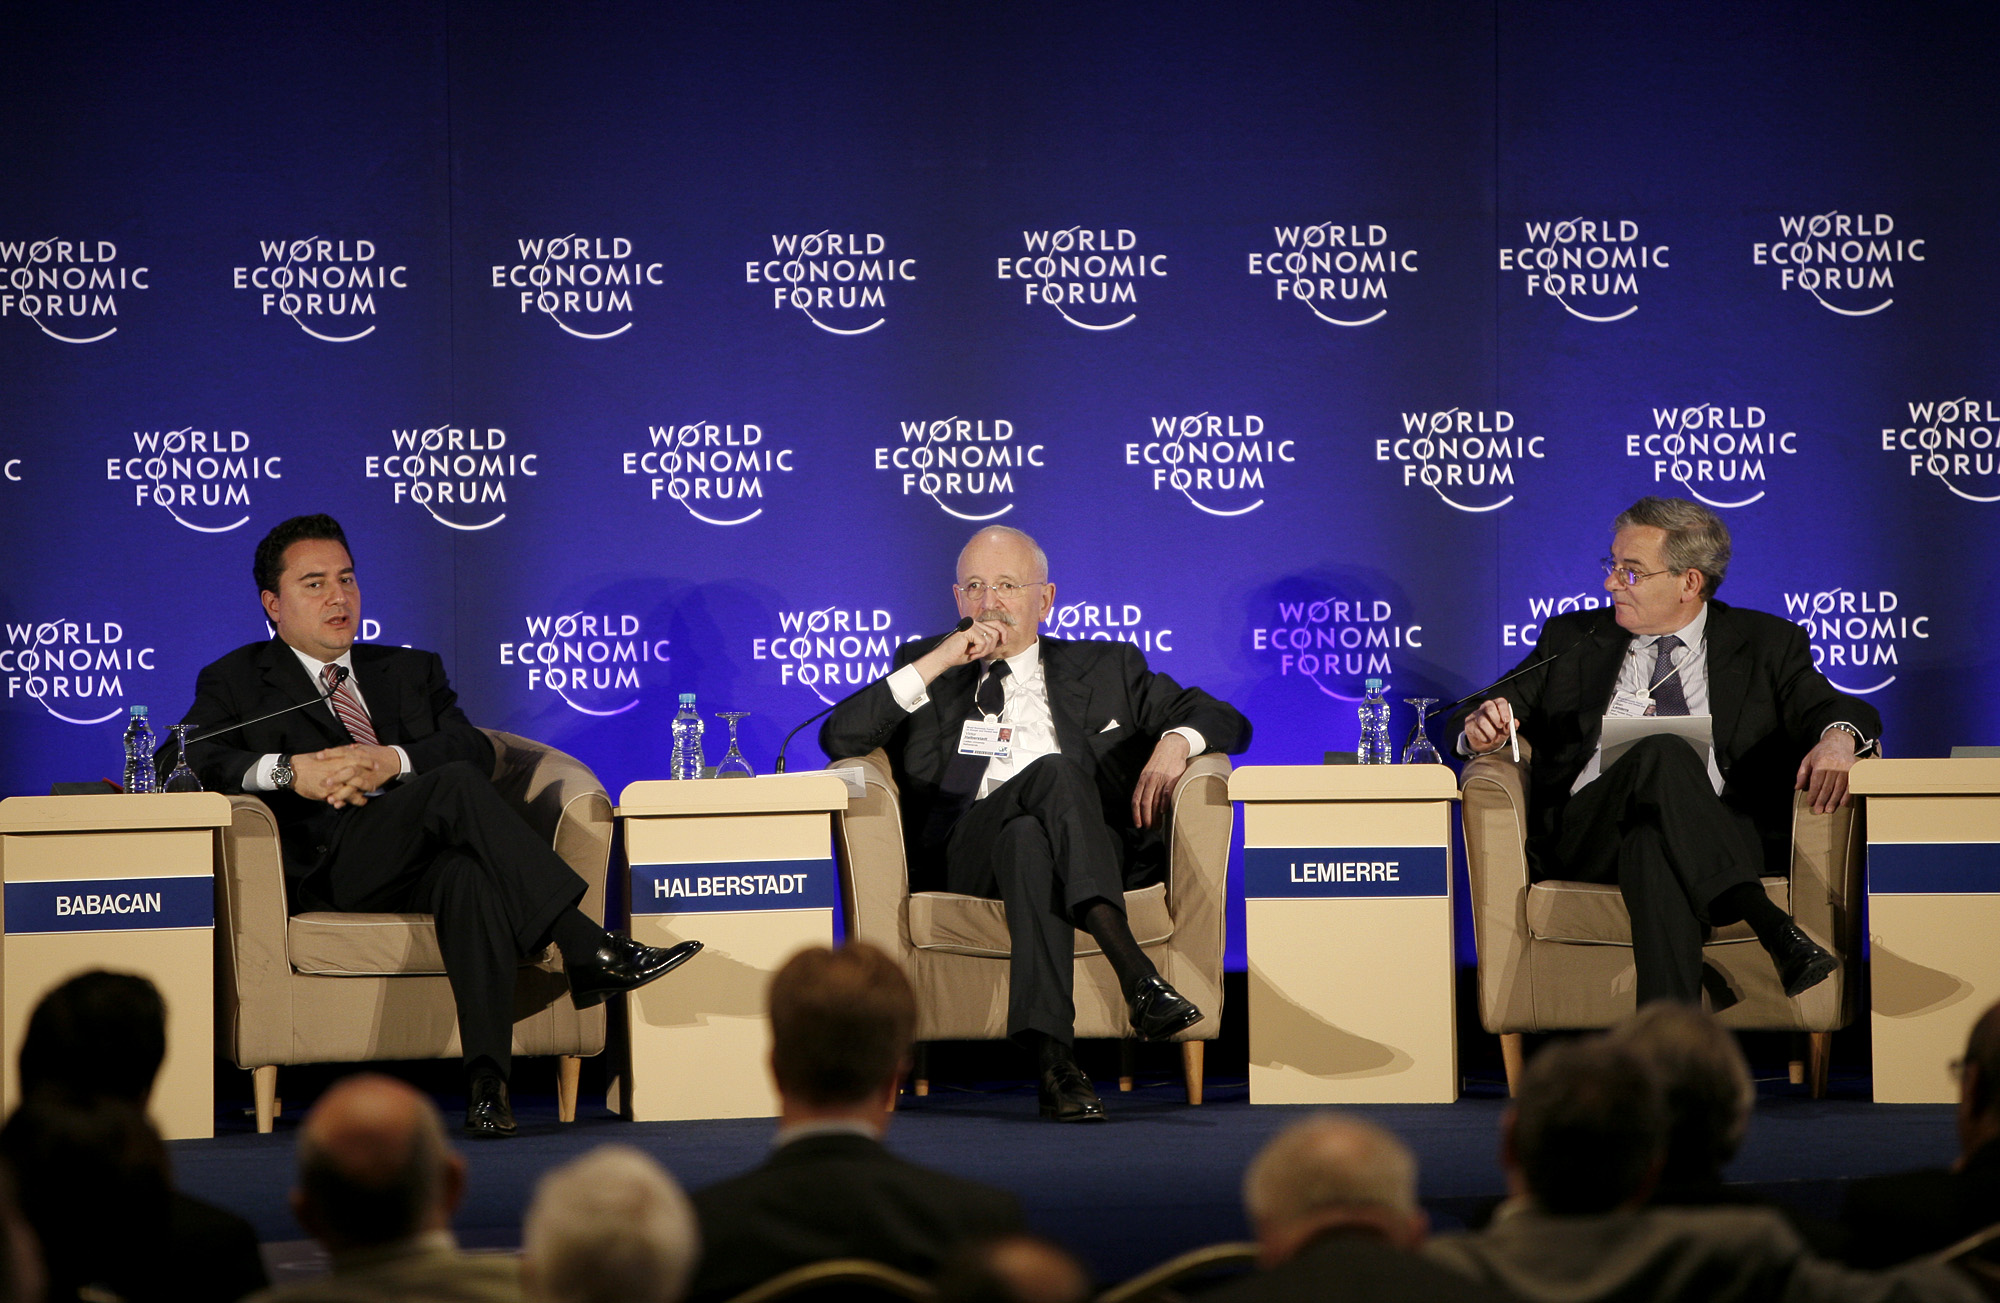 World Economic Forum The Institution Behind “The Great Reset